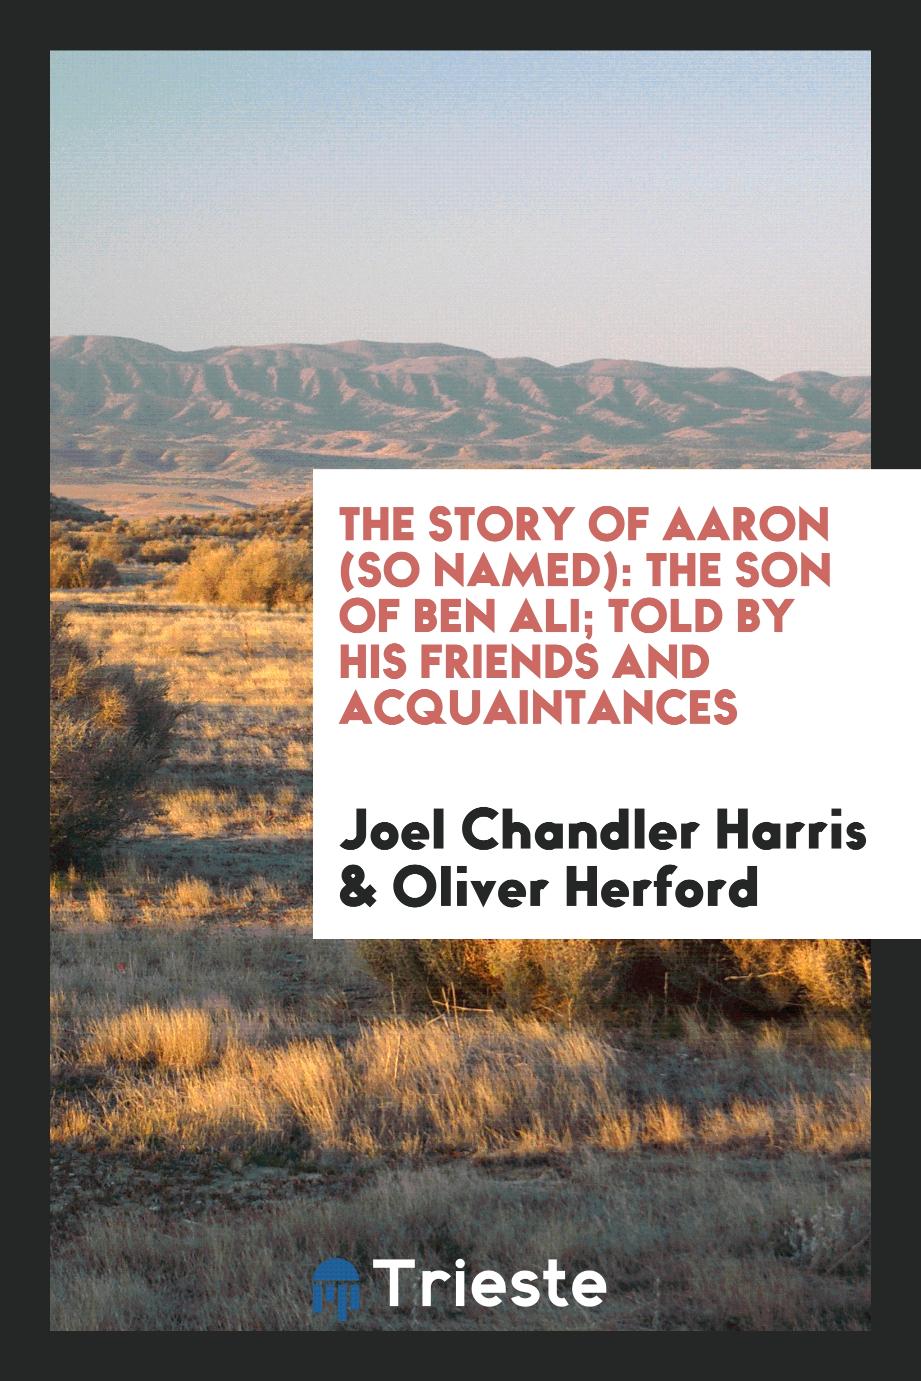 The story of Aaron (so named): the son of Ben Ali; told by his friends and acquaintances